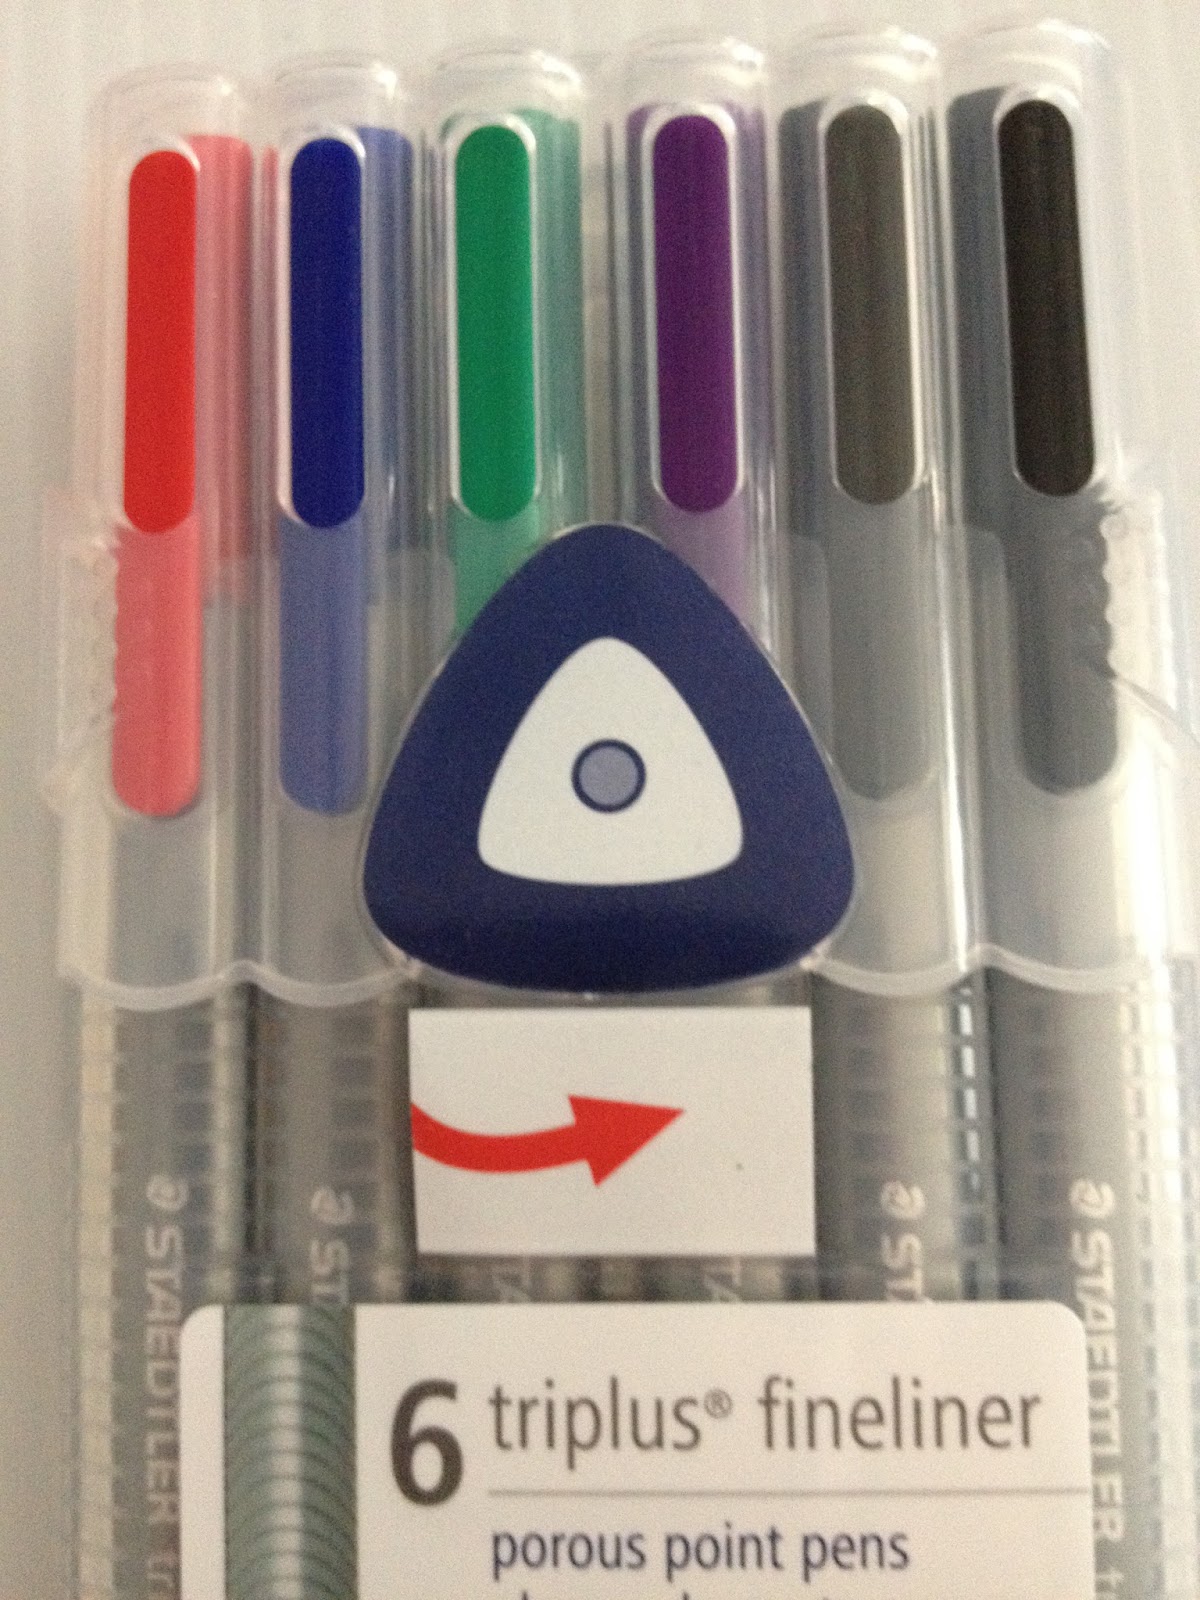 Staedtler Triplus Fineliner .3 mm Colored Pens- set of 20 — Two Hands  Paperie